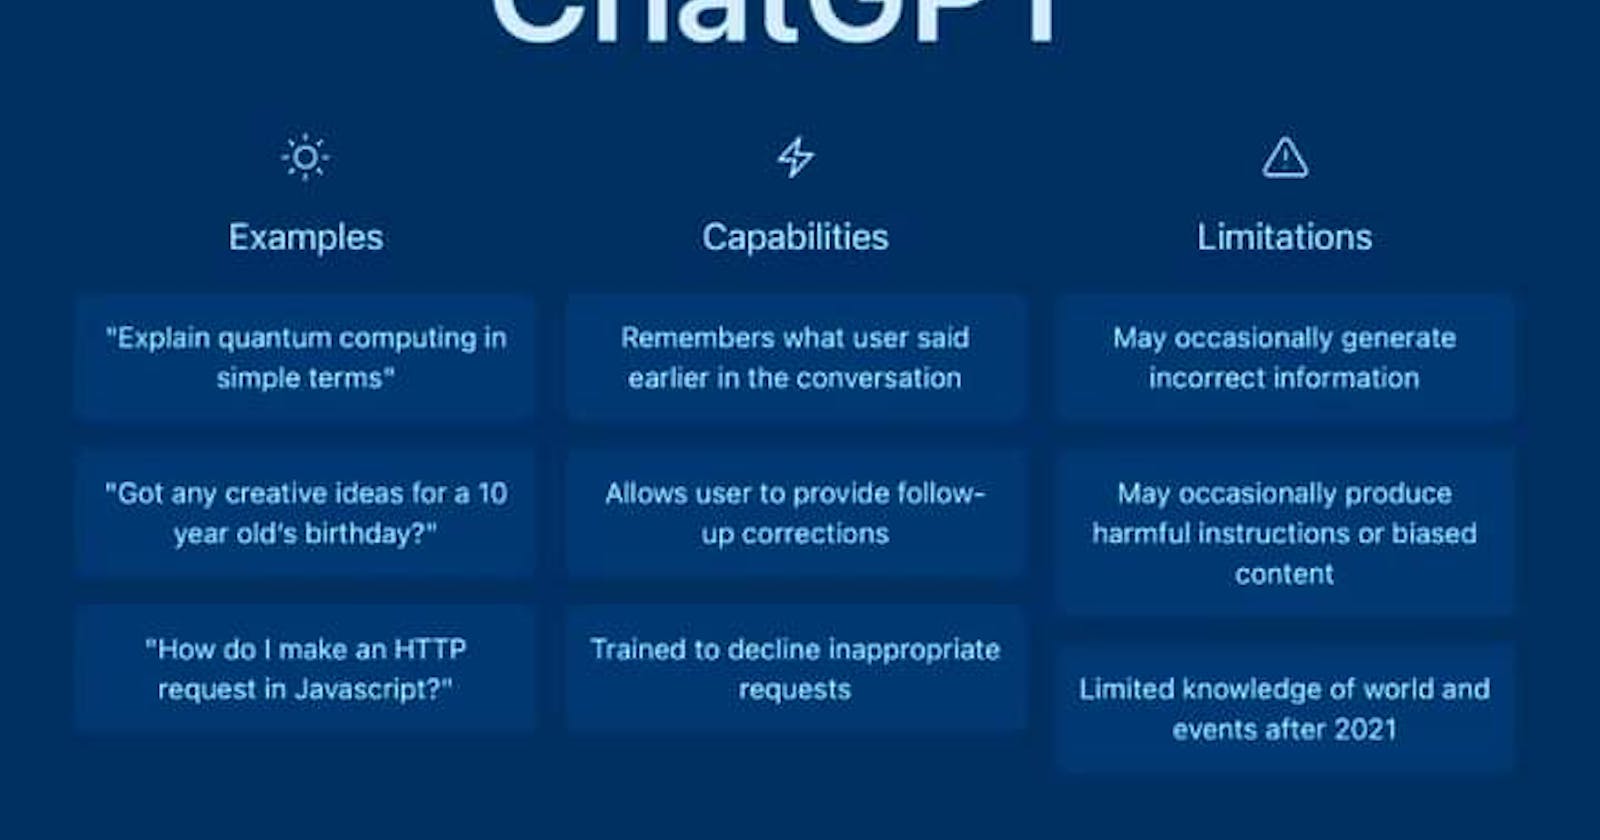 Here are 10 interesting ChatGPT use cases